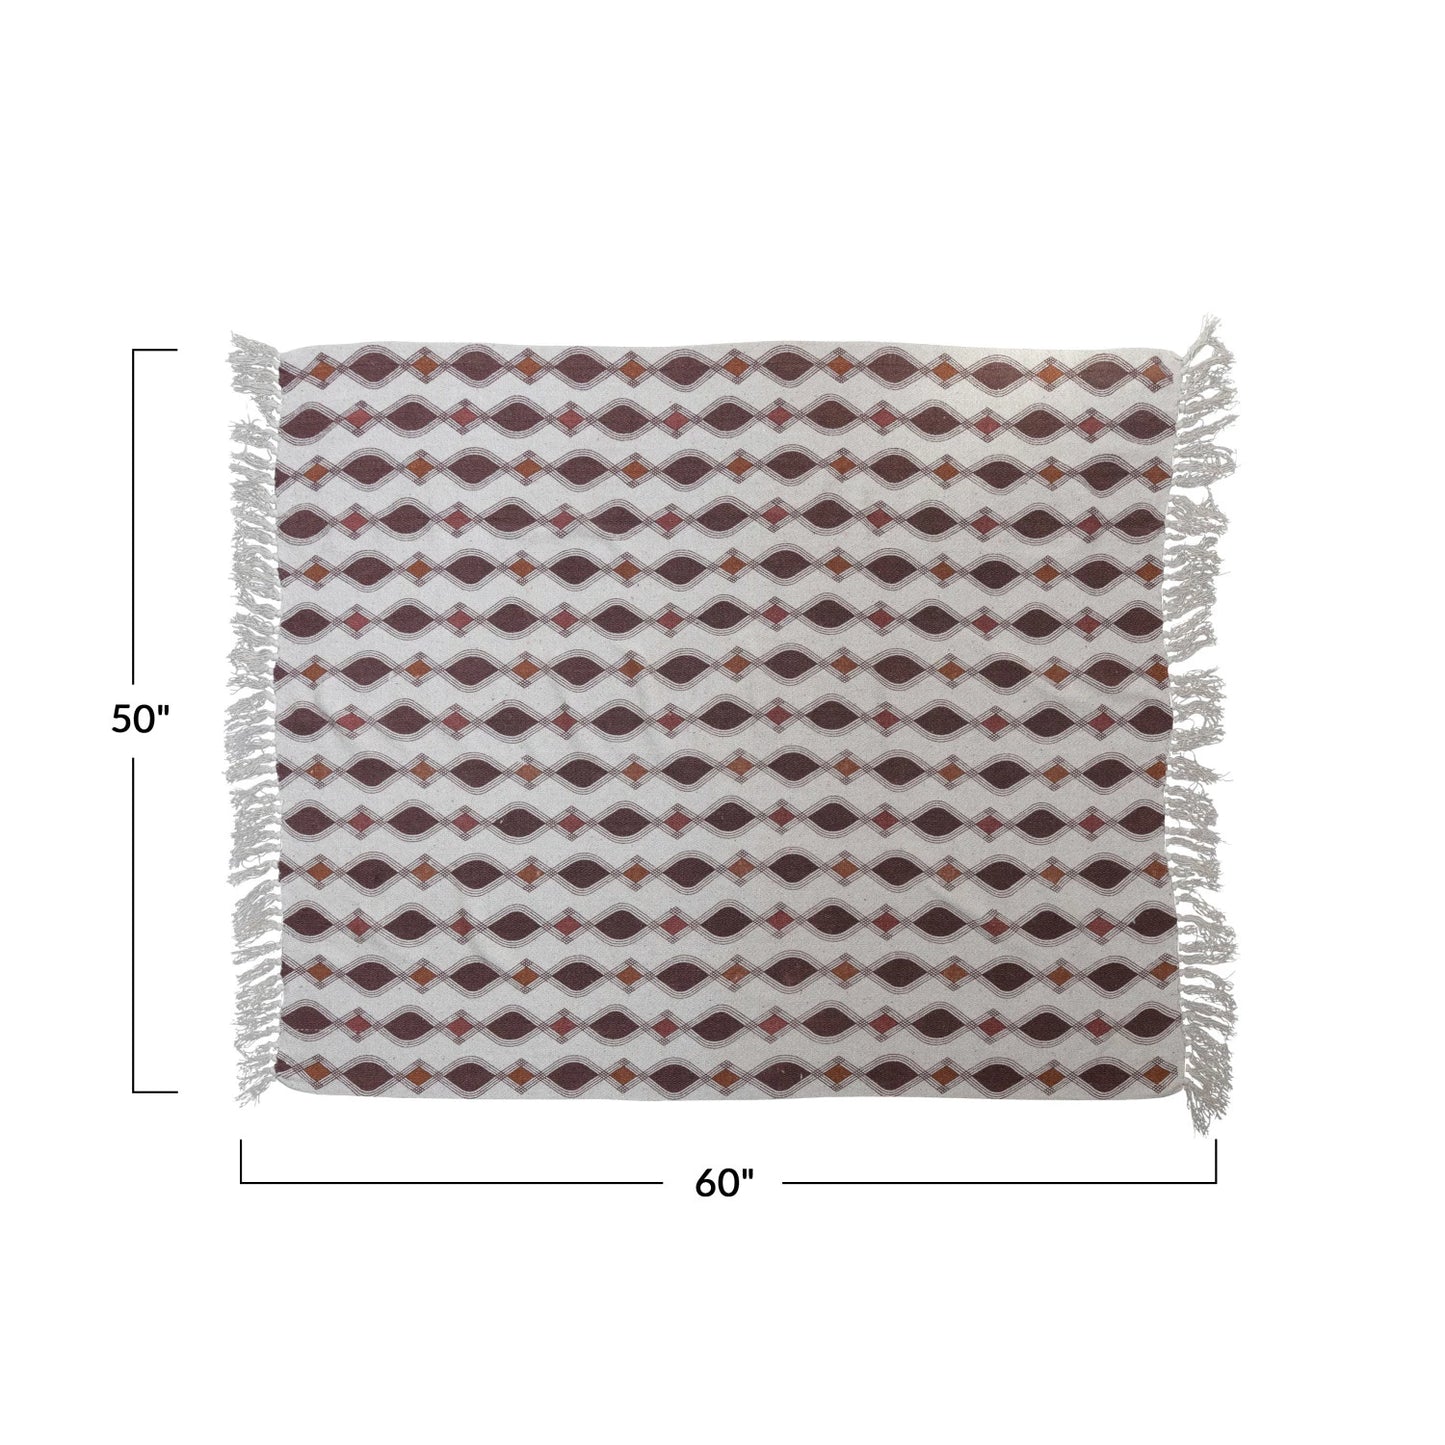 Recycled Cotton Blend Printed Throw w/ Pattern | Brown & Cream